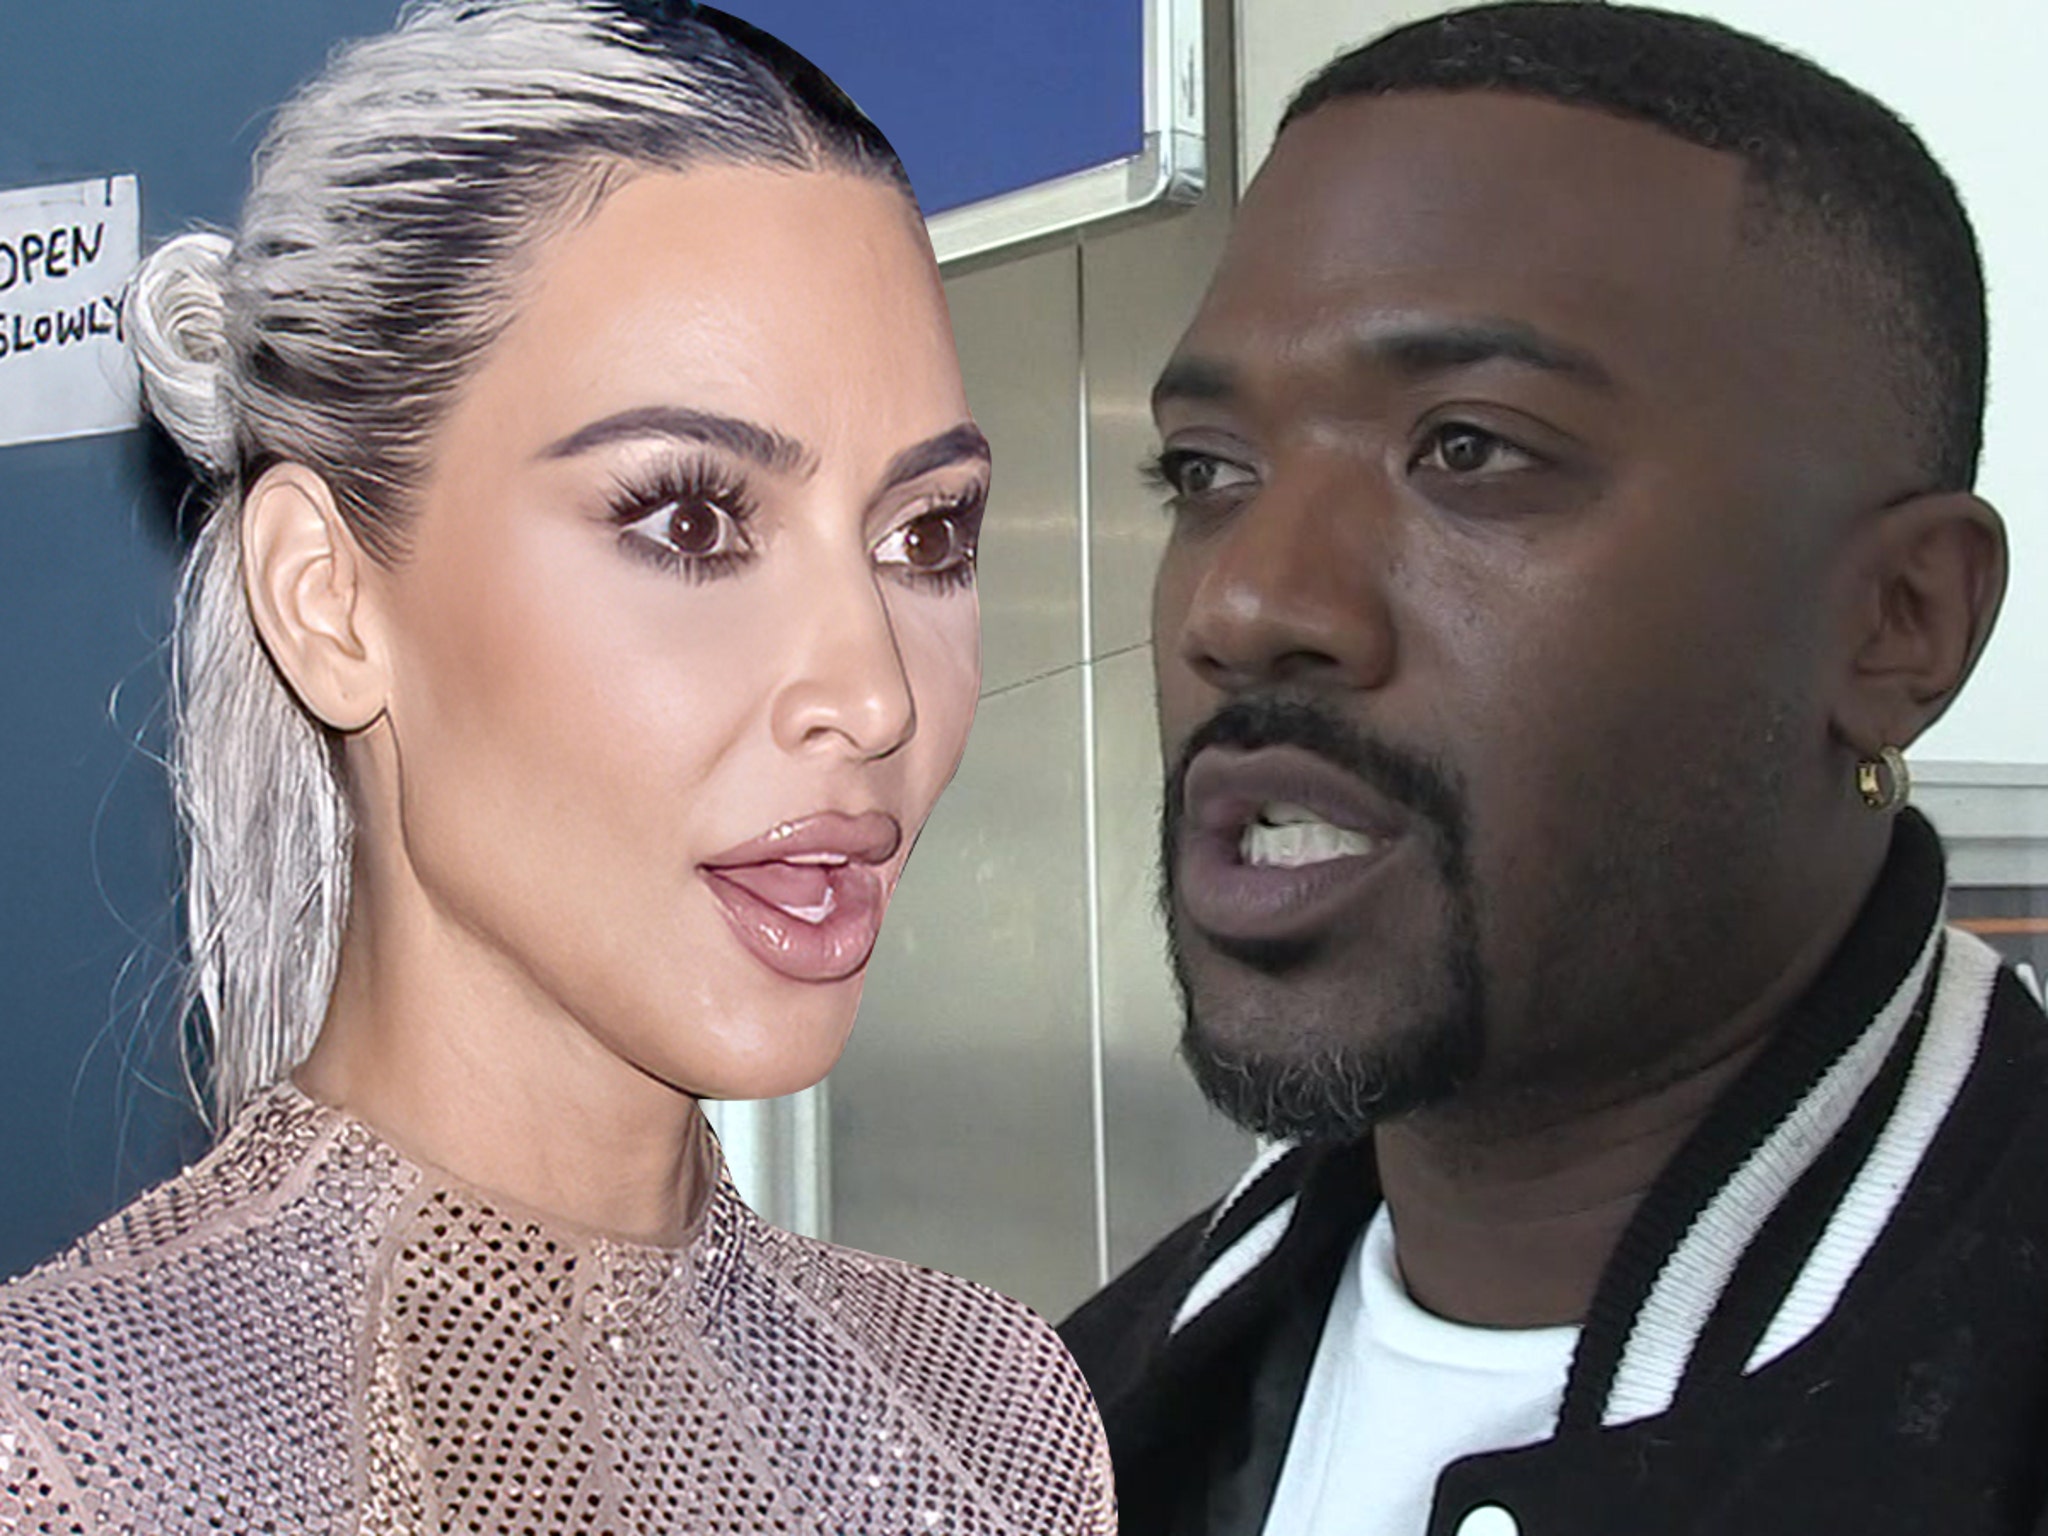 Lil Kim Sex Tape - Kim Kardashian and Ray J Got Email Early on About Sex Tape Profits